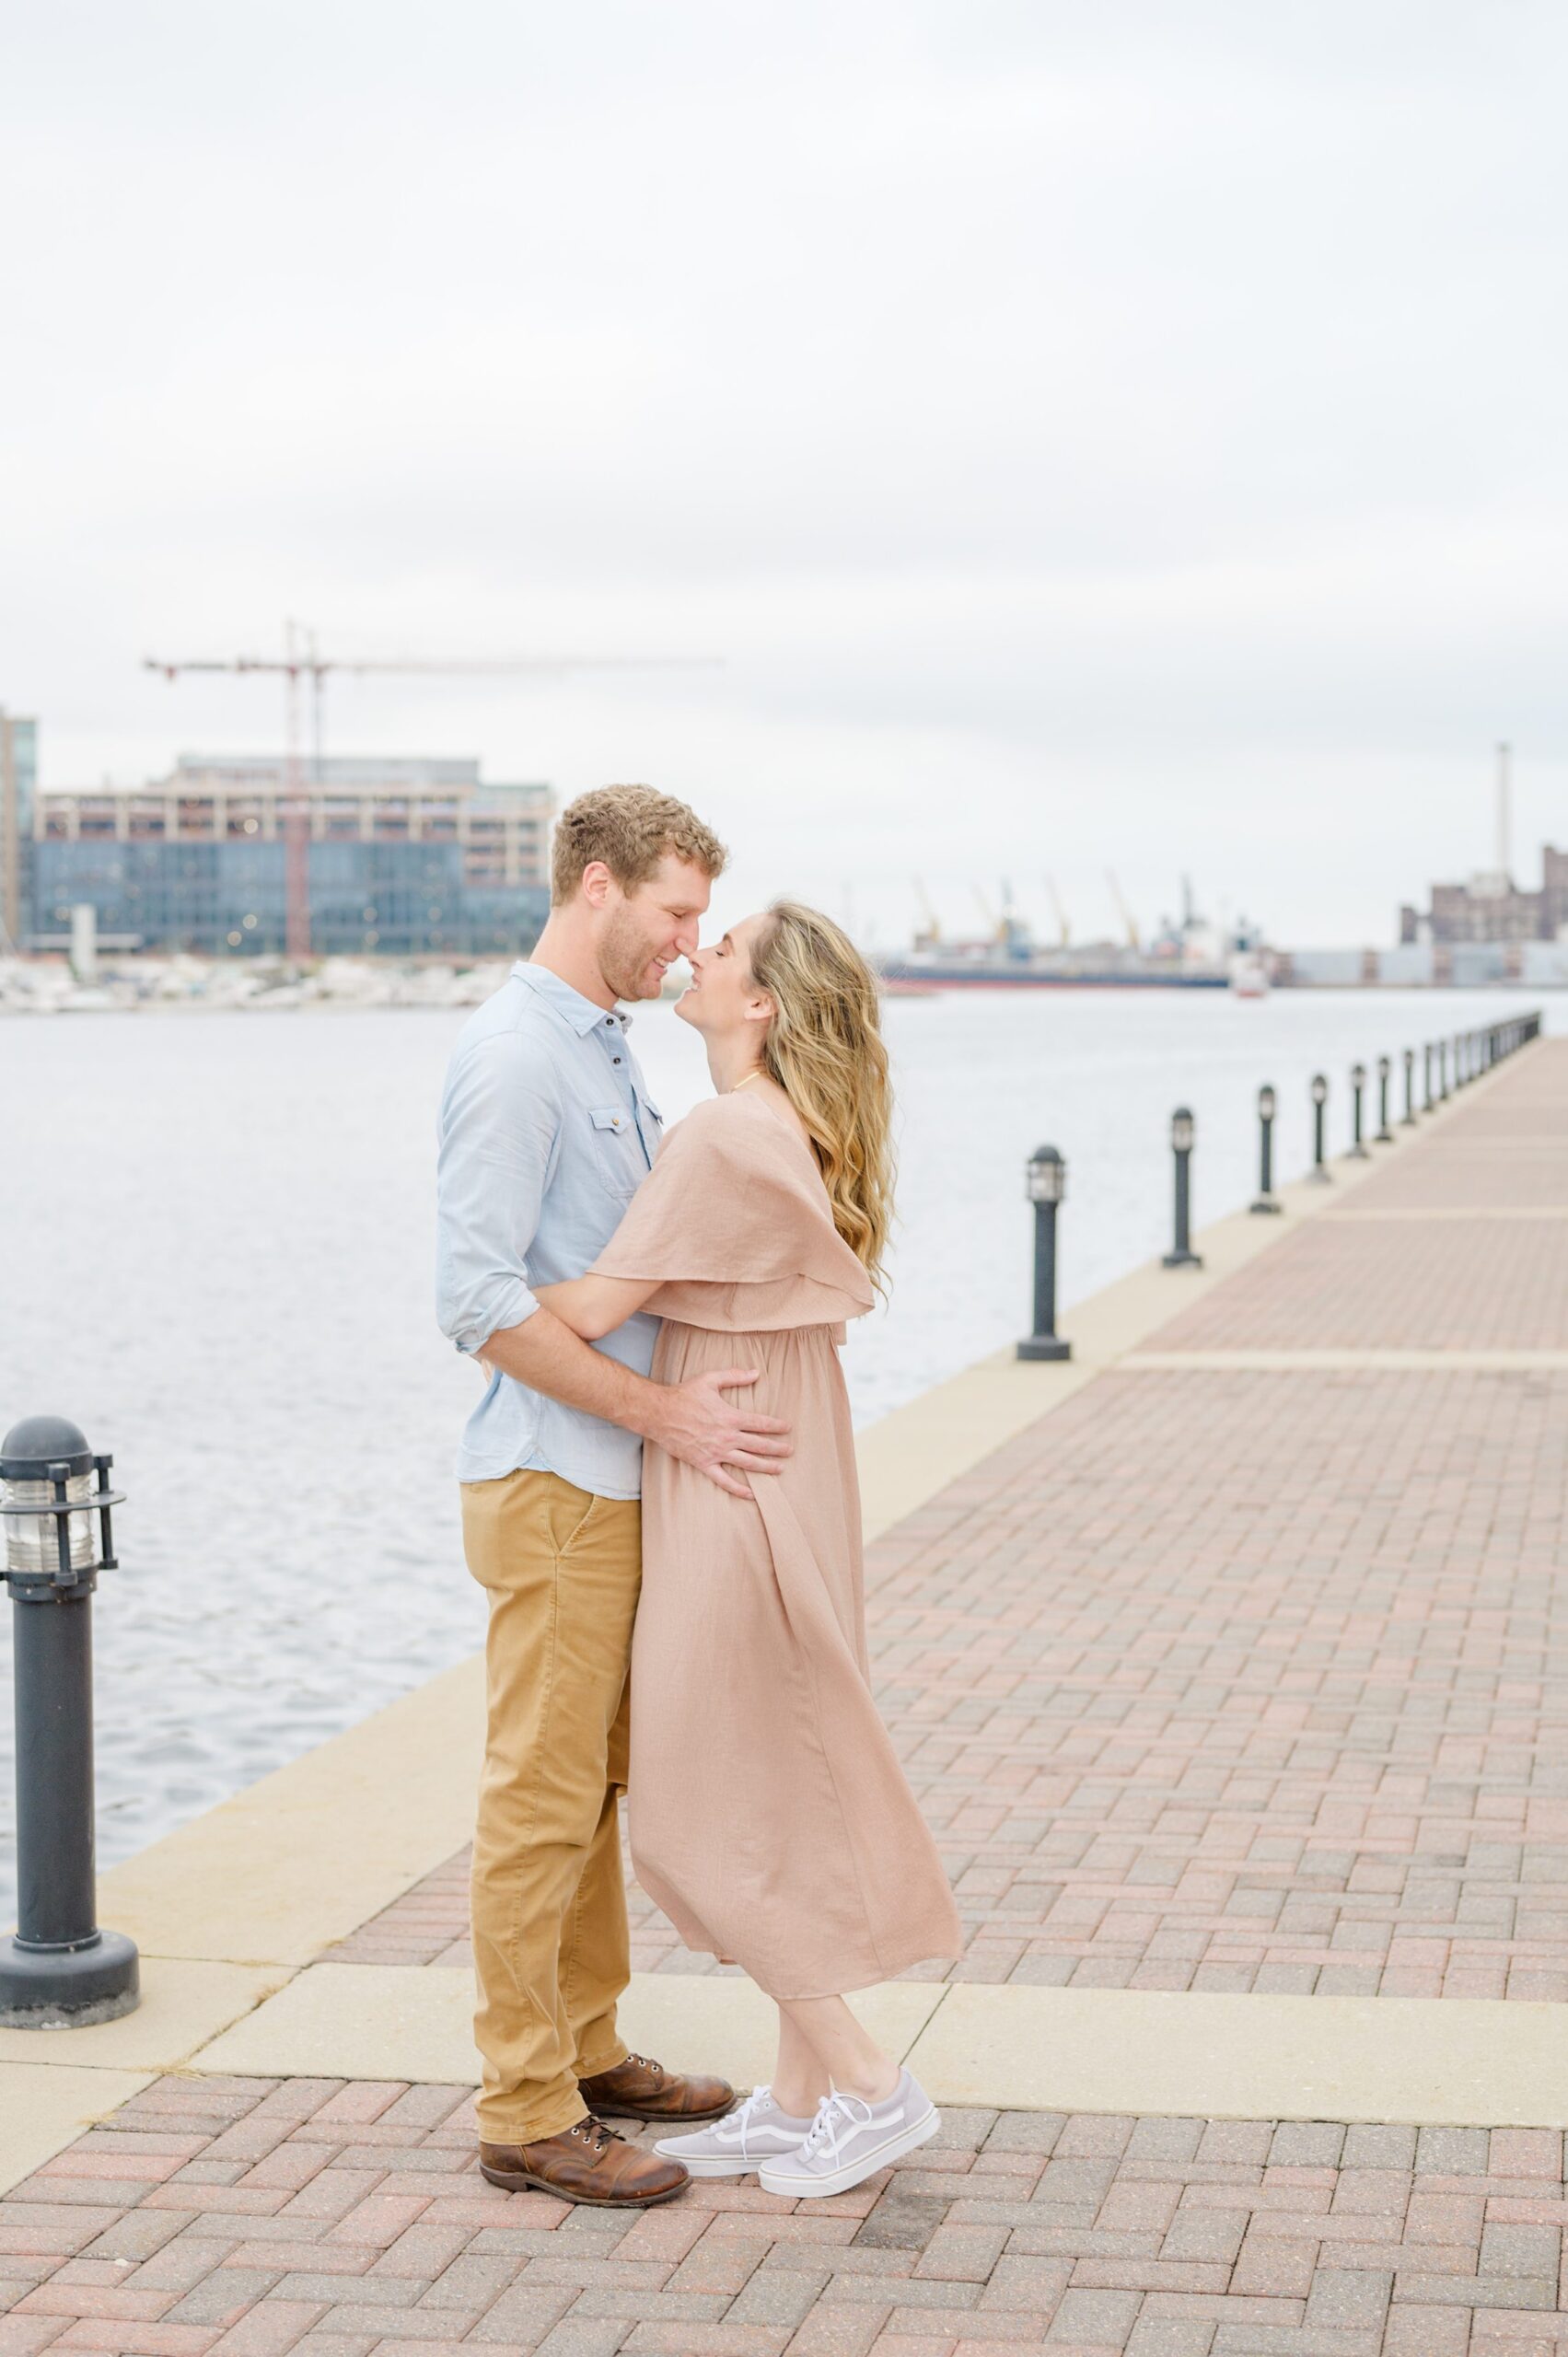 Pregnancy announcement photos at the Baltimore Inner Harbor photographed by Baltimore Maternity Photographer Cait Kramer.